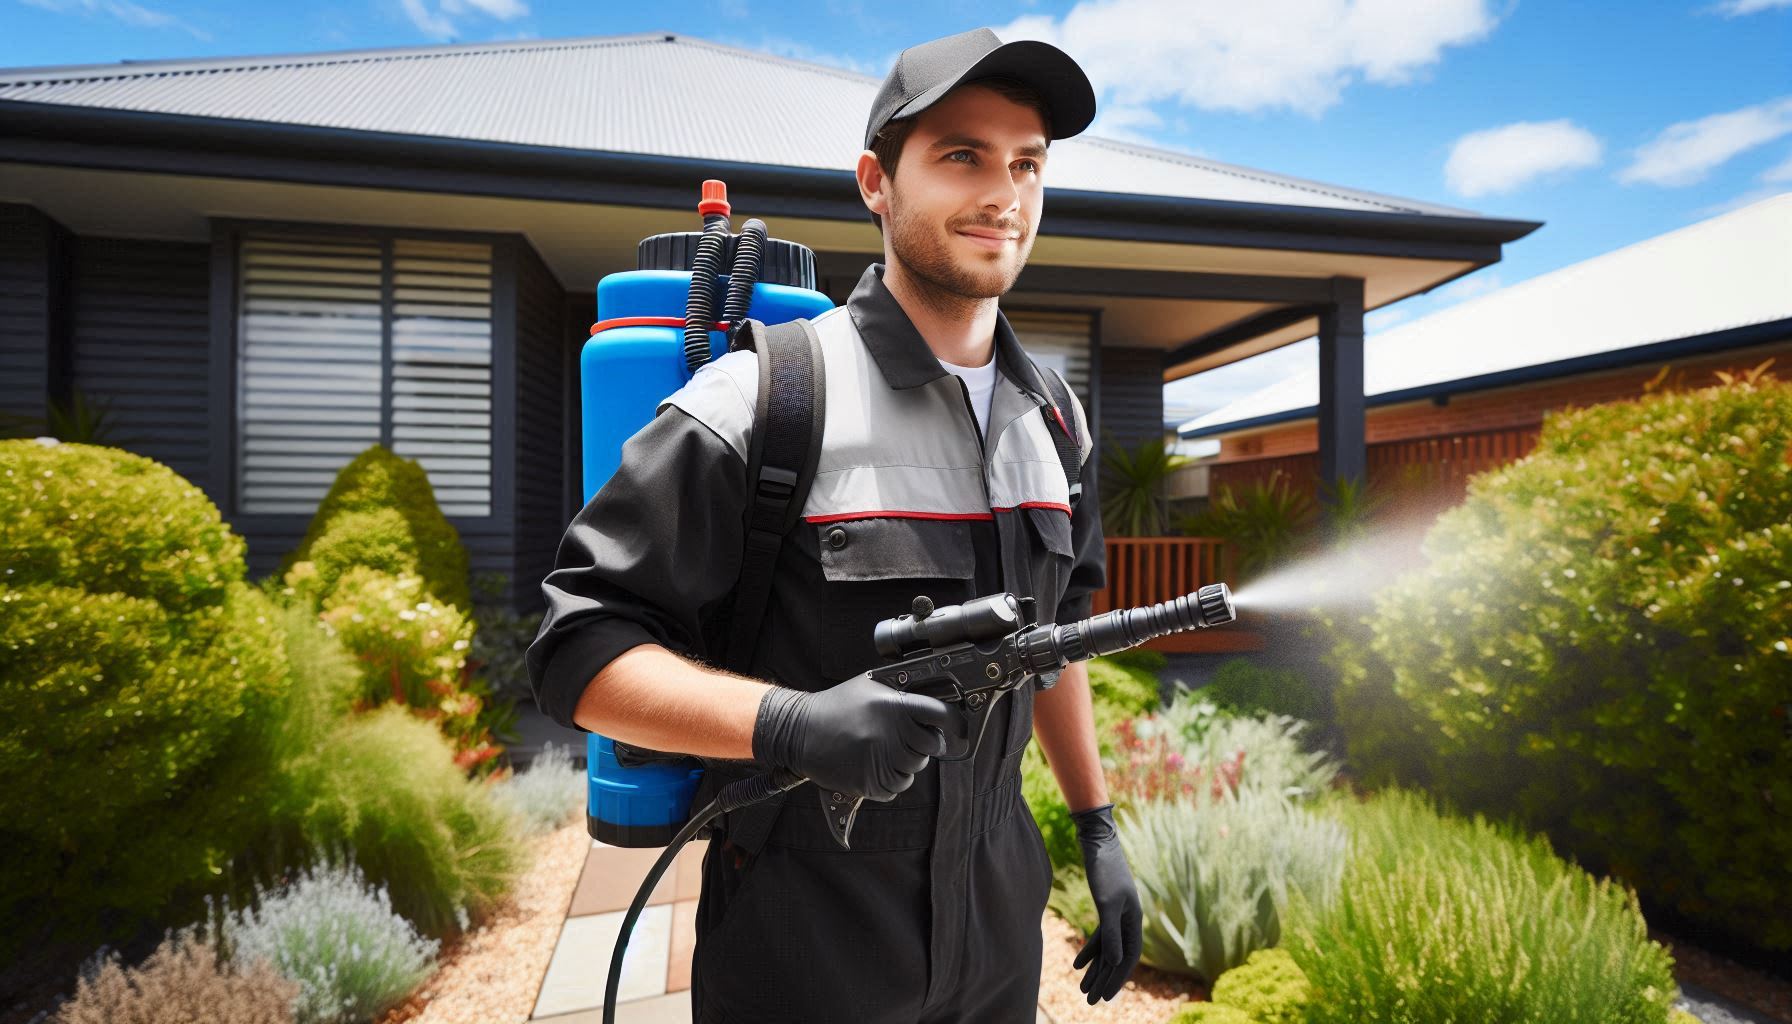 Pest Control Services in Dandenong